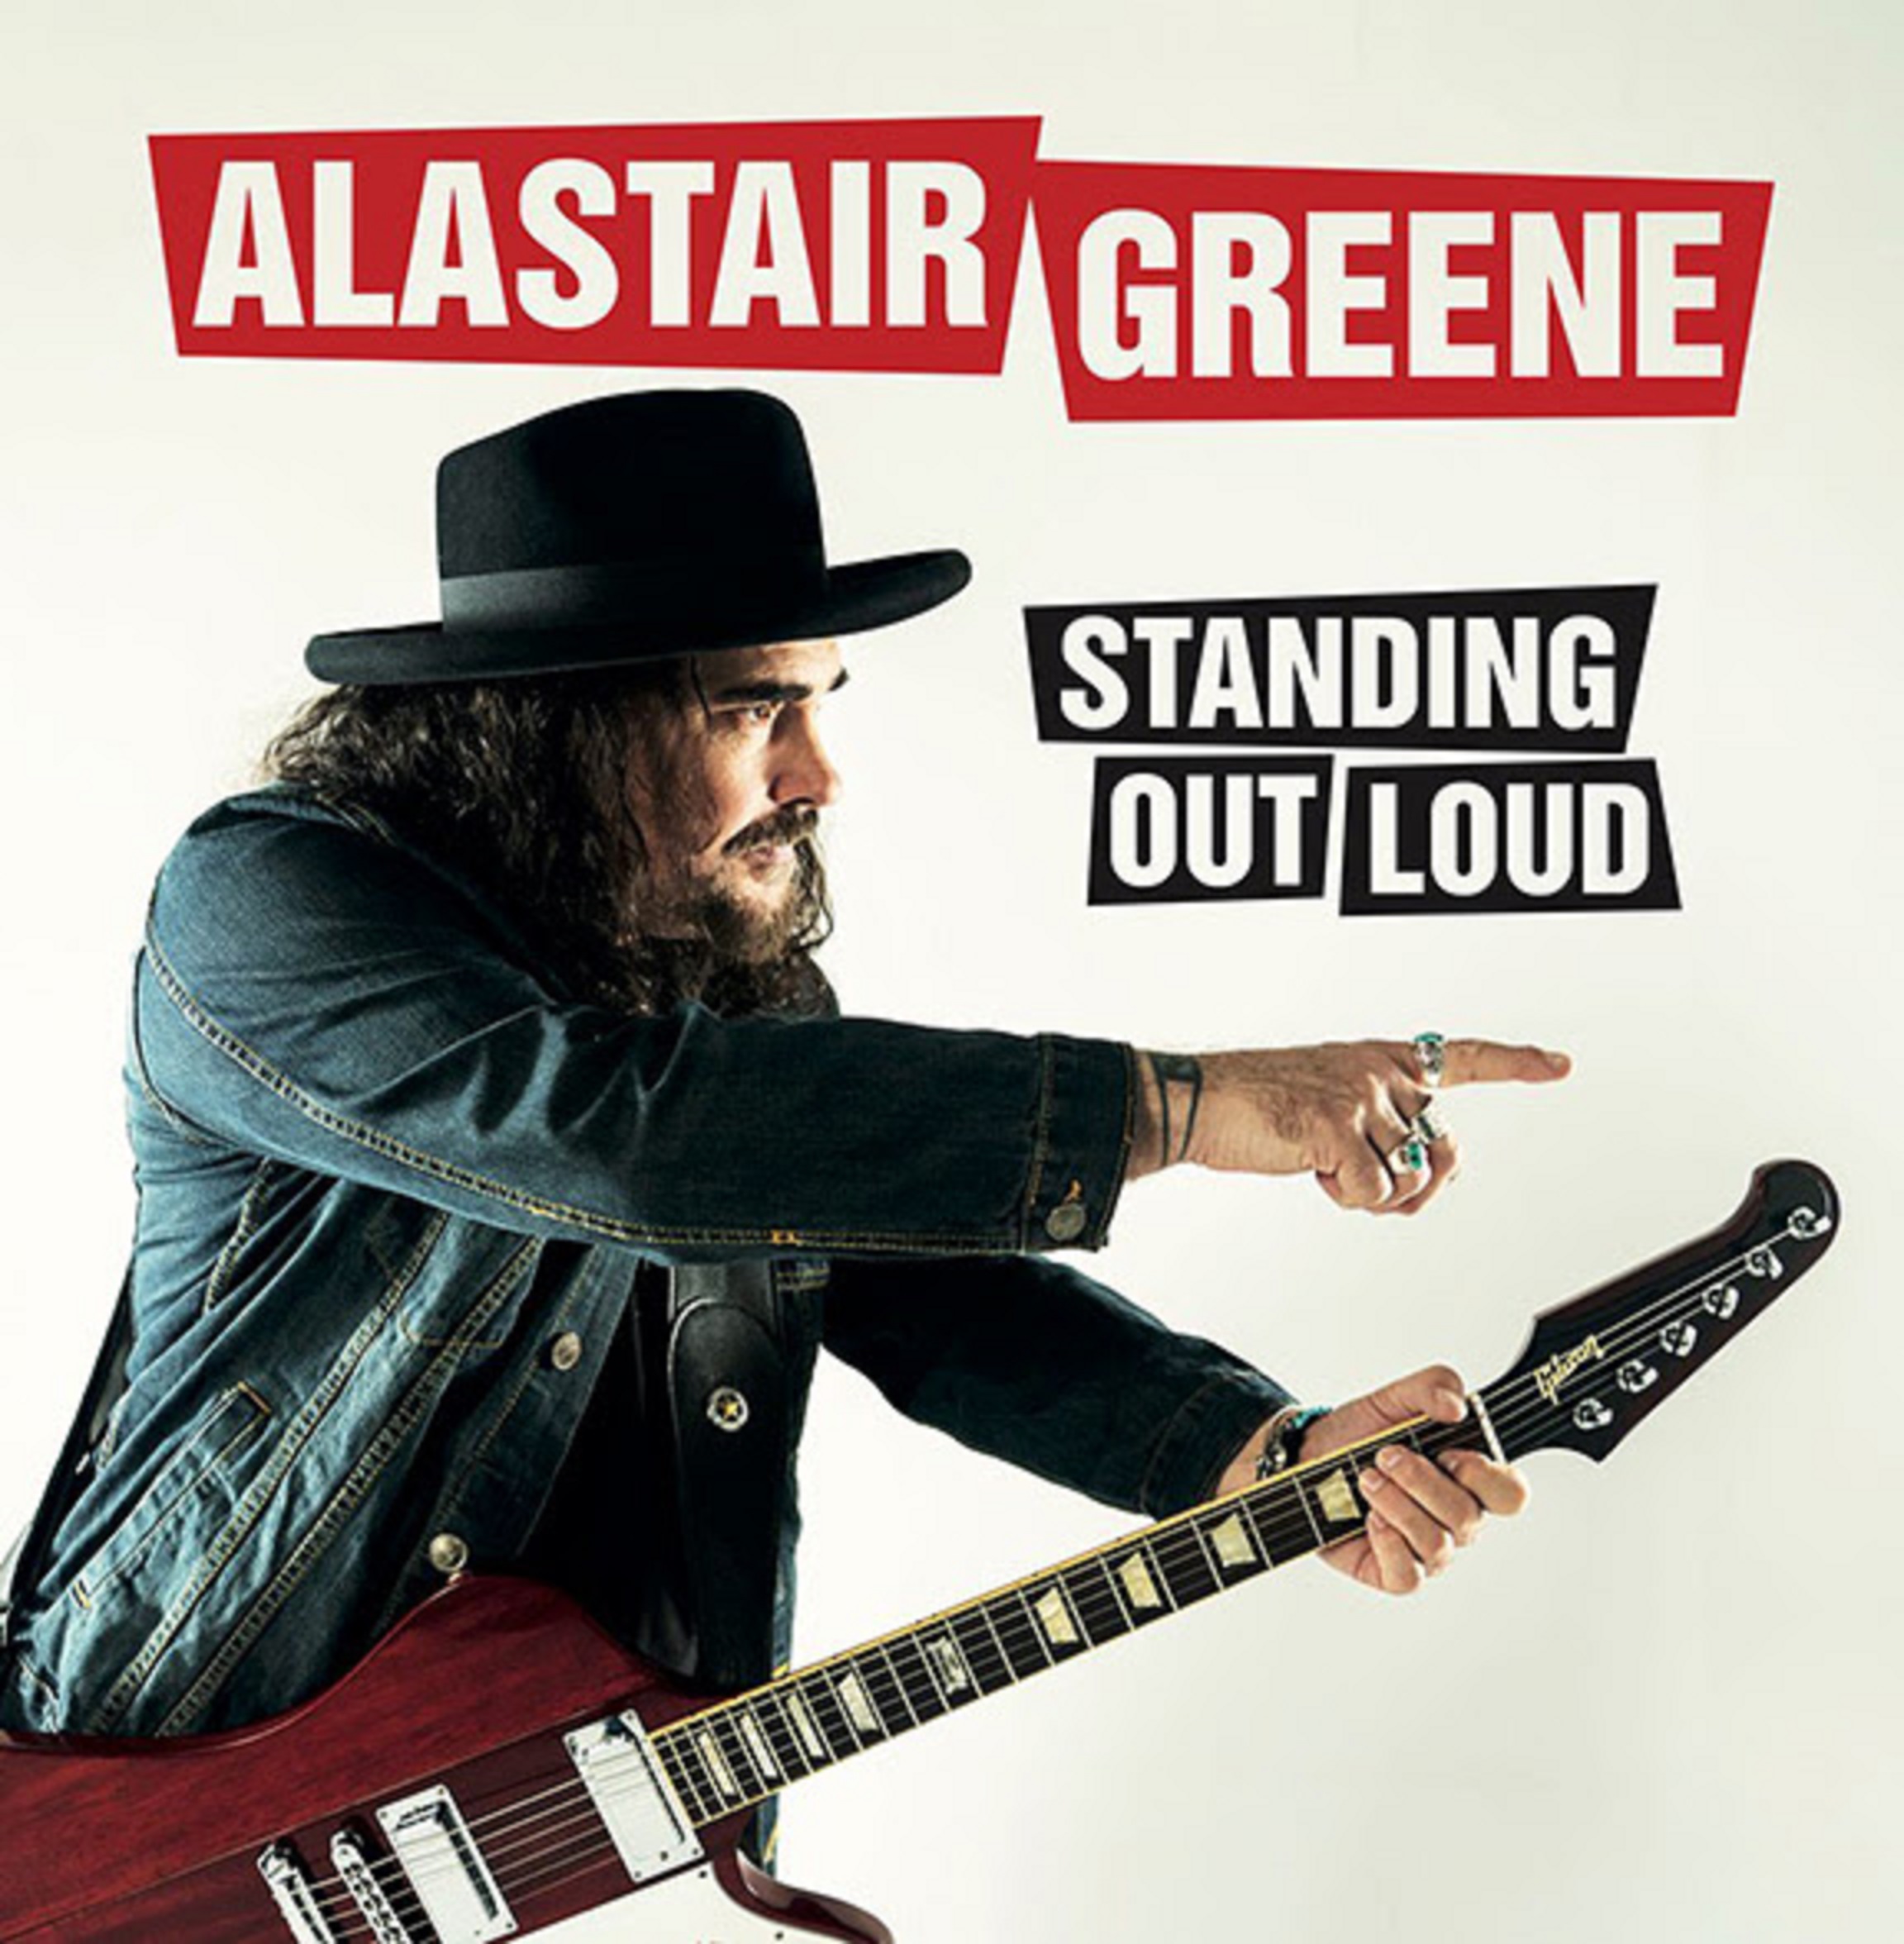 ALASTAIR GREENE DEBUTS NEW ALBUM ON RENOWNED BLUES LABEL RUF RECORDS 